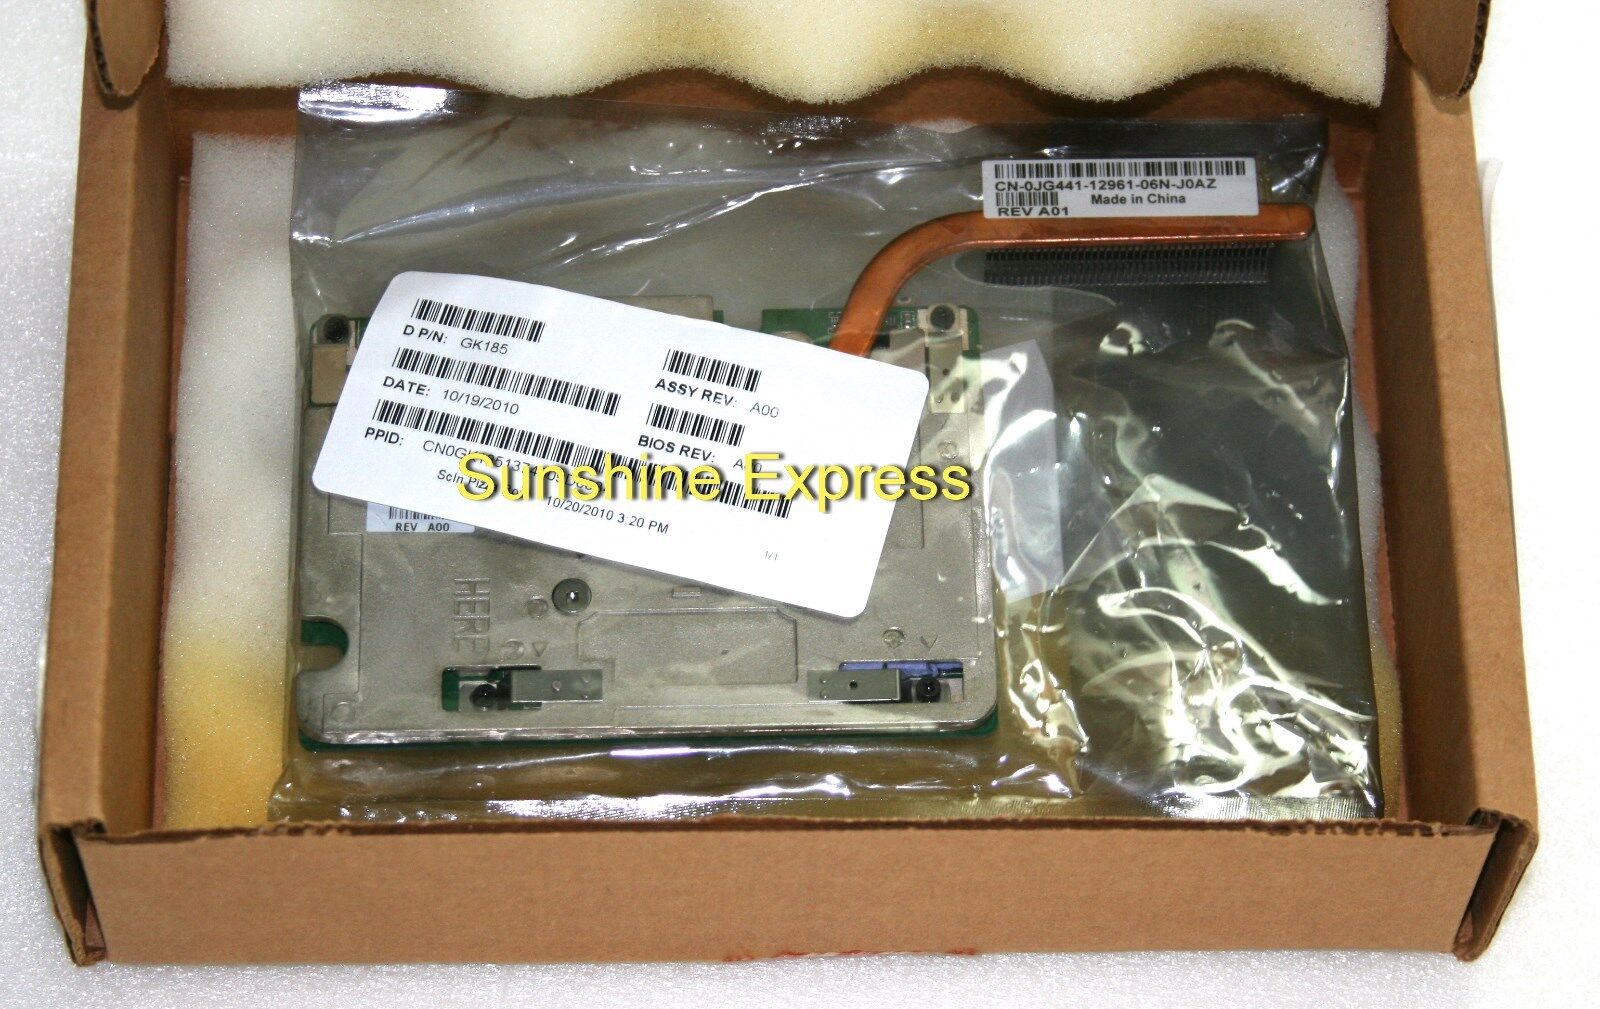 New OEM Dell GK185 nVidia GeForce GO 7800 256MB Video Card for Inspiron 9400 M90